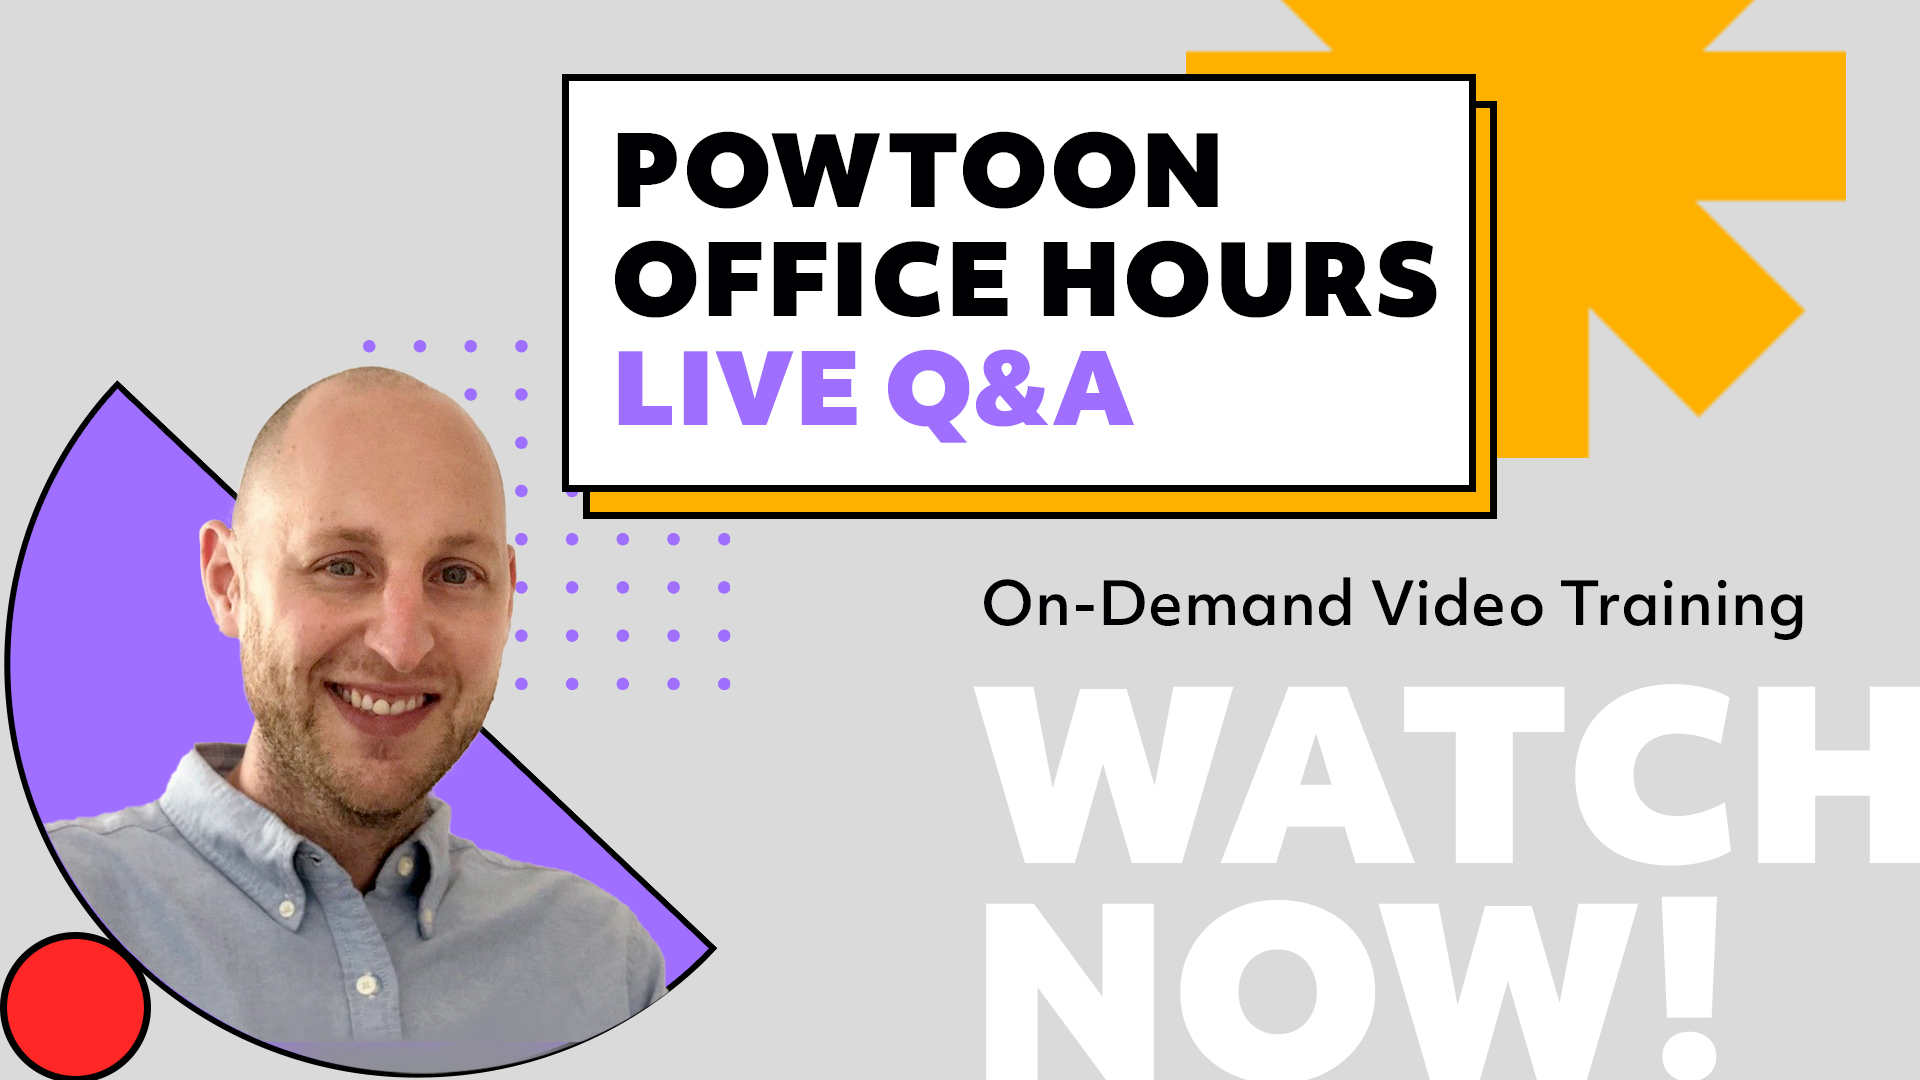 Powtoon office hours live Q+A with the head of customer success